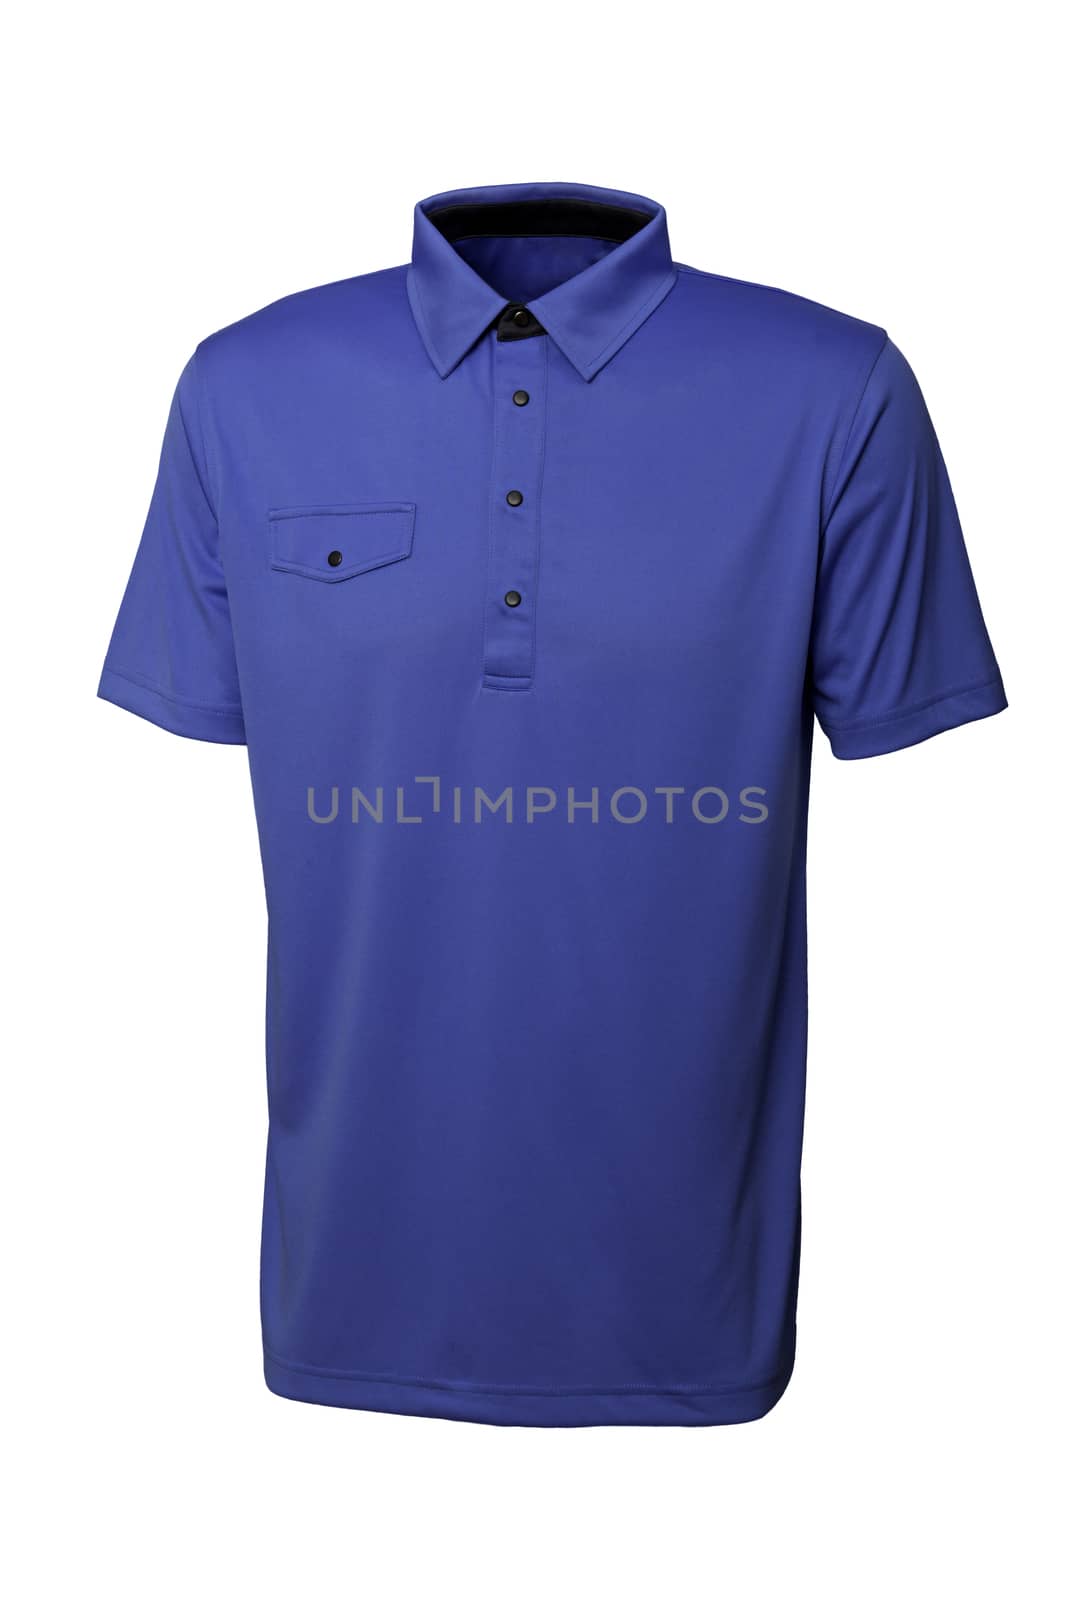 Blue color golf tee shirt for man or woman on white background